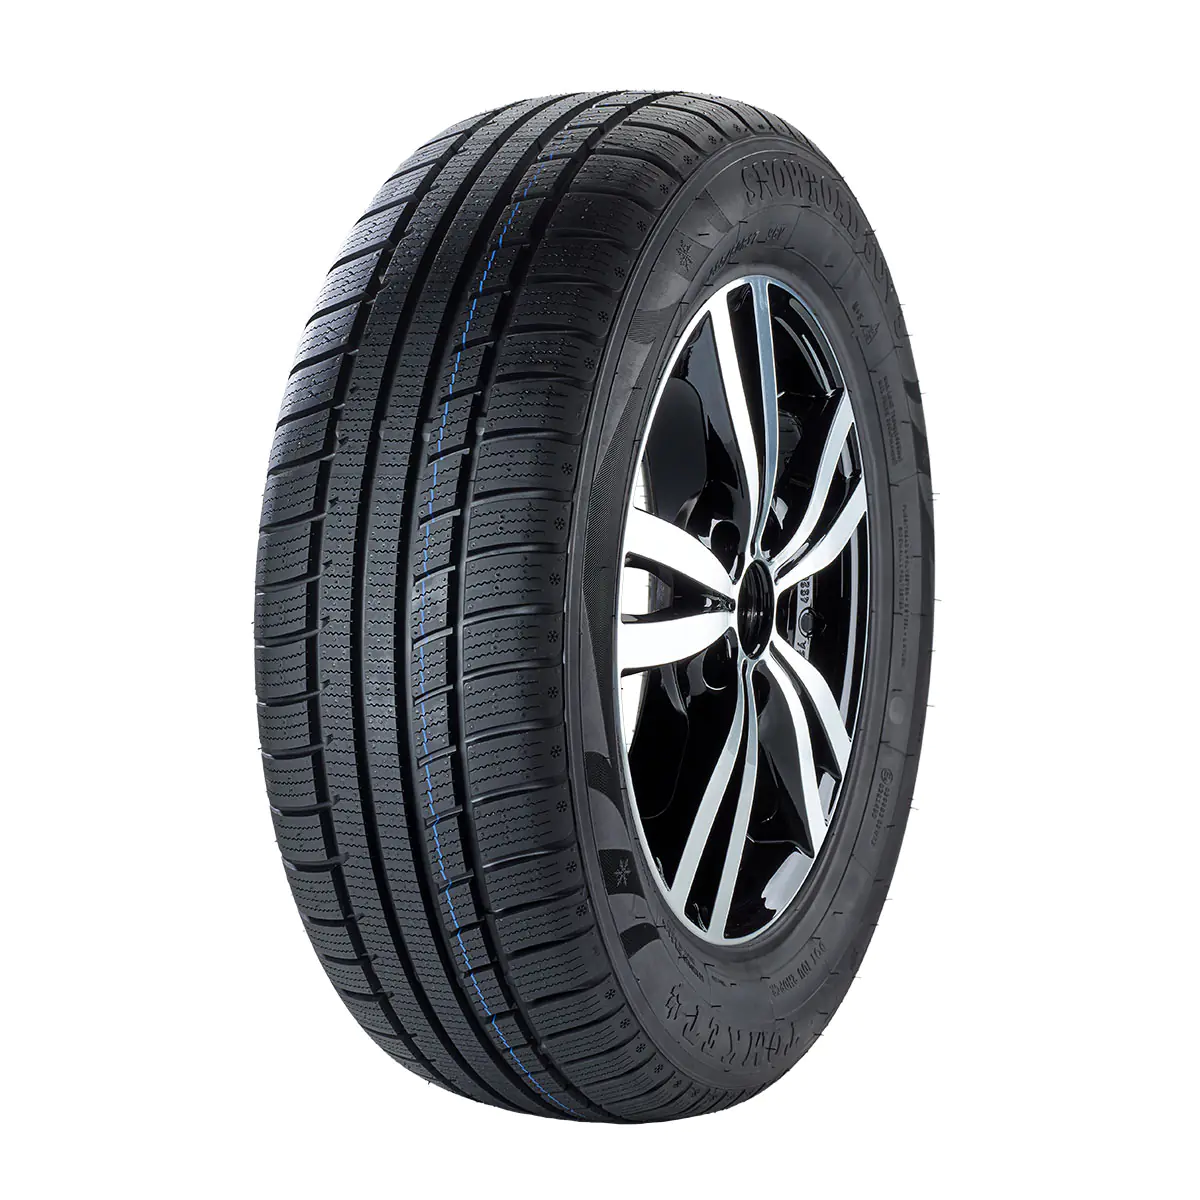 Gomme 4x4 Suv Tomket 225/65 R17 106V SNOWROAD SUV 3 XL M+S Invernale